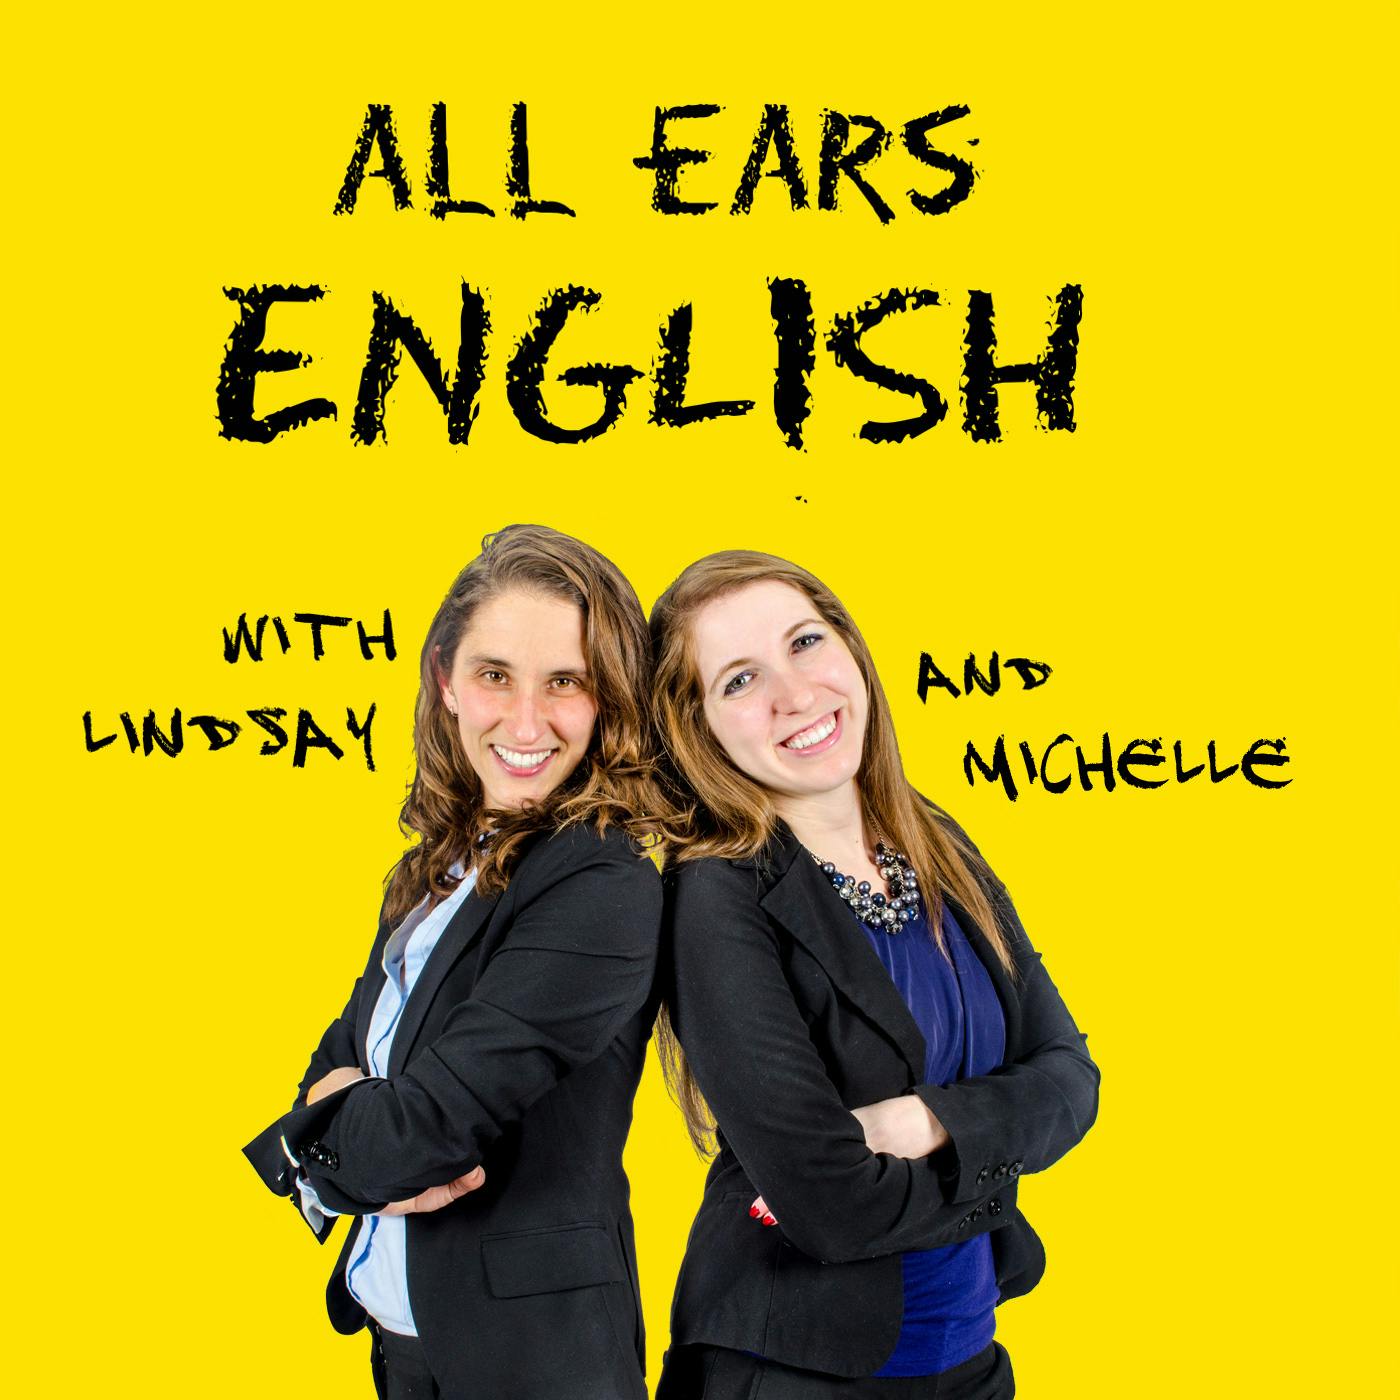 AEE 807: The Many Colorful Ways to Walk in English